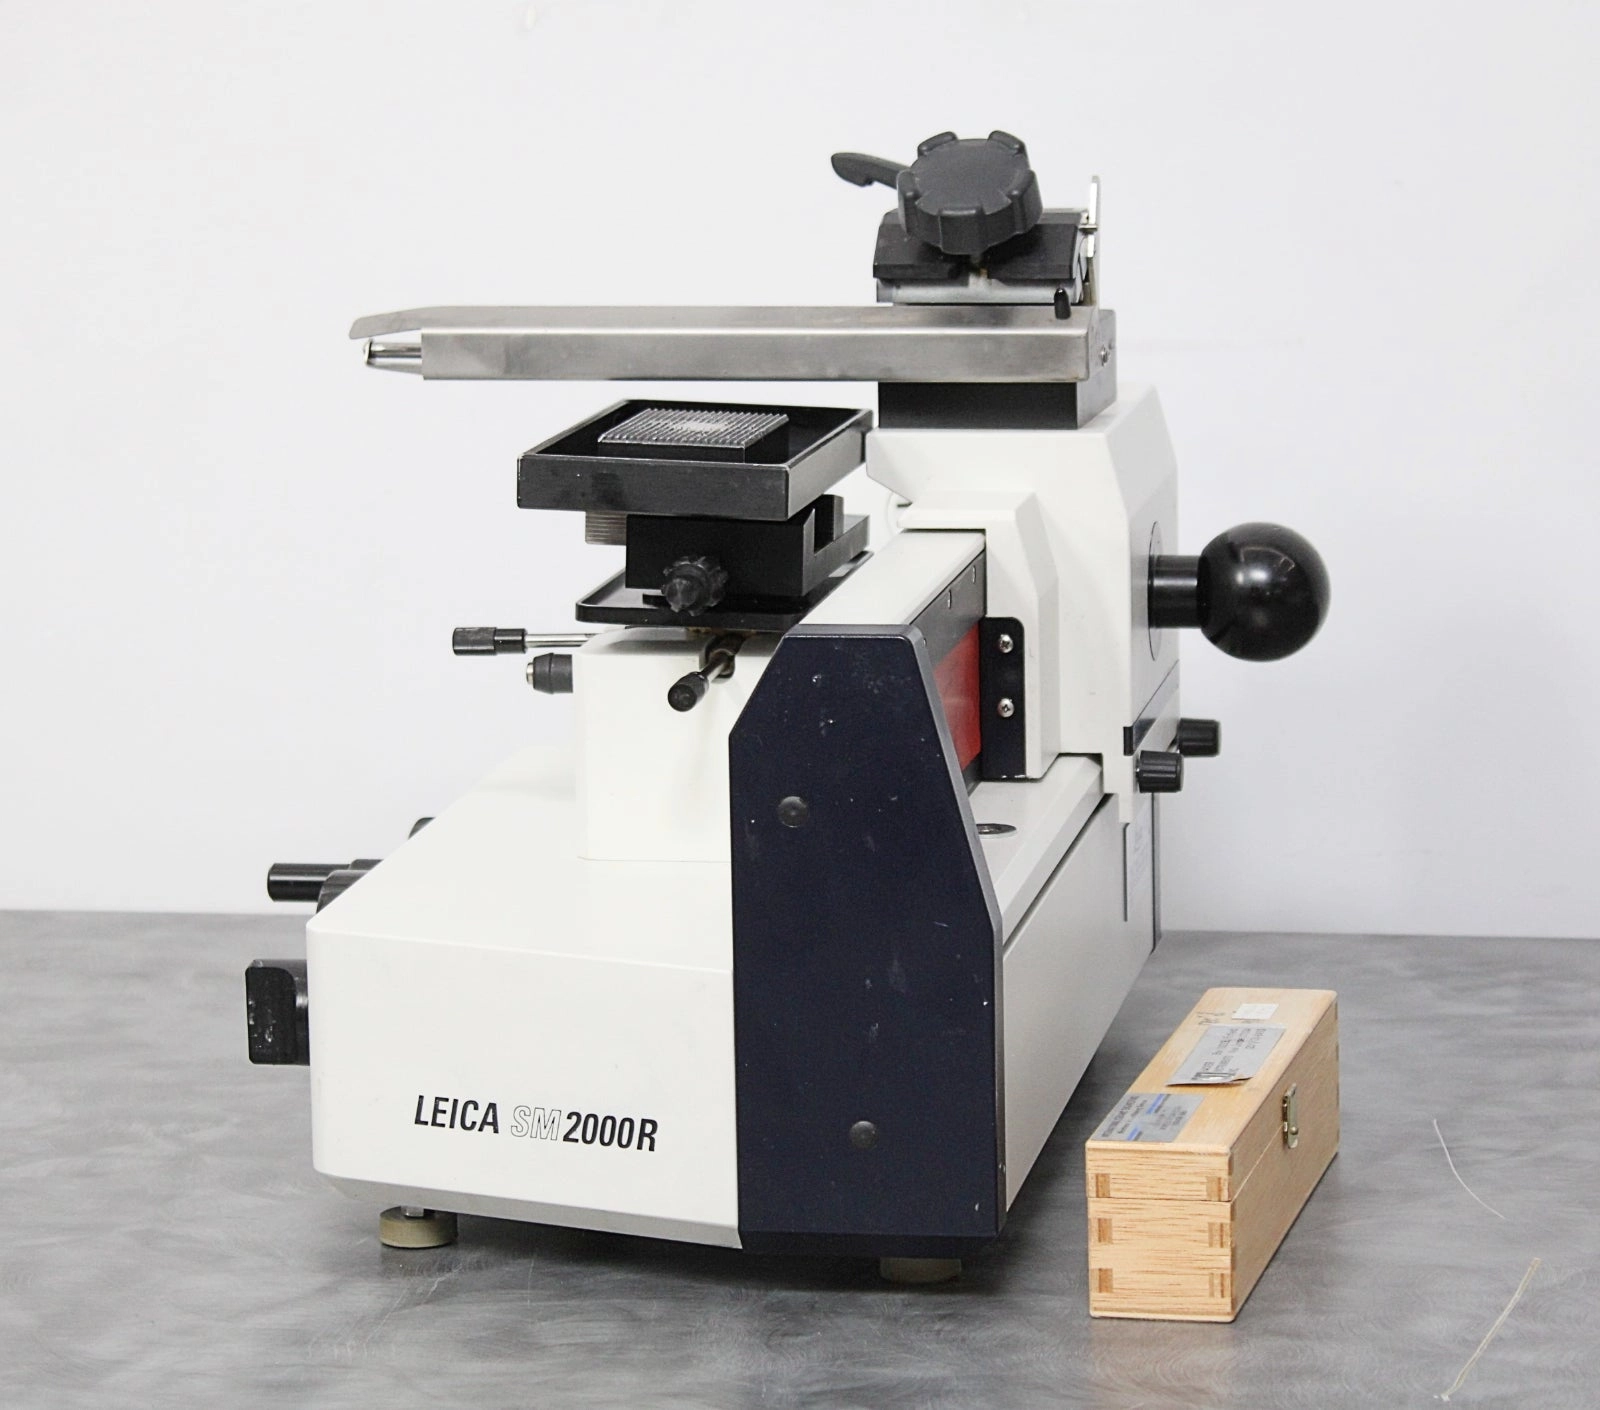 Used American Optical Spencer 935 Microtome Knife Sharpener for